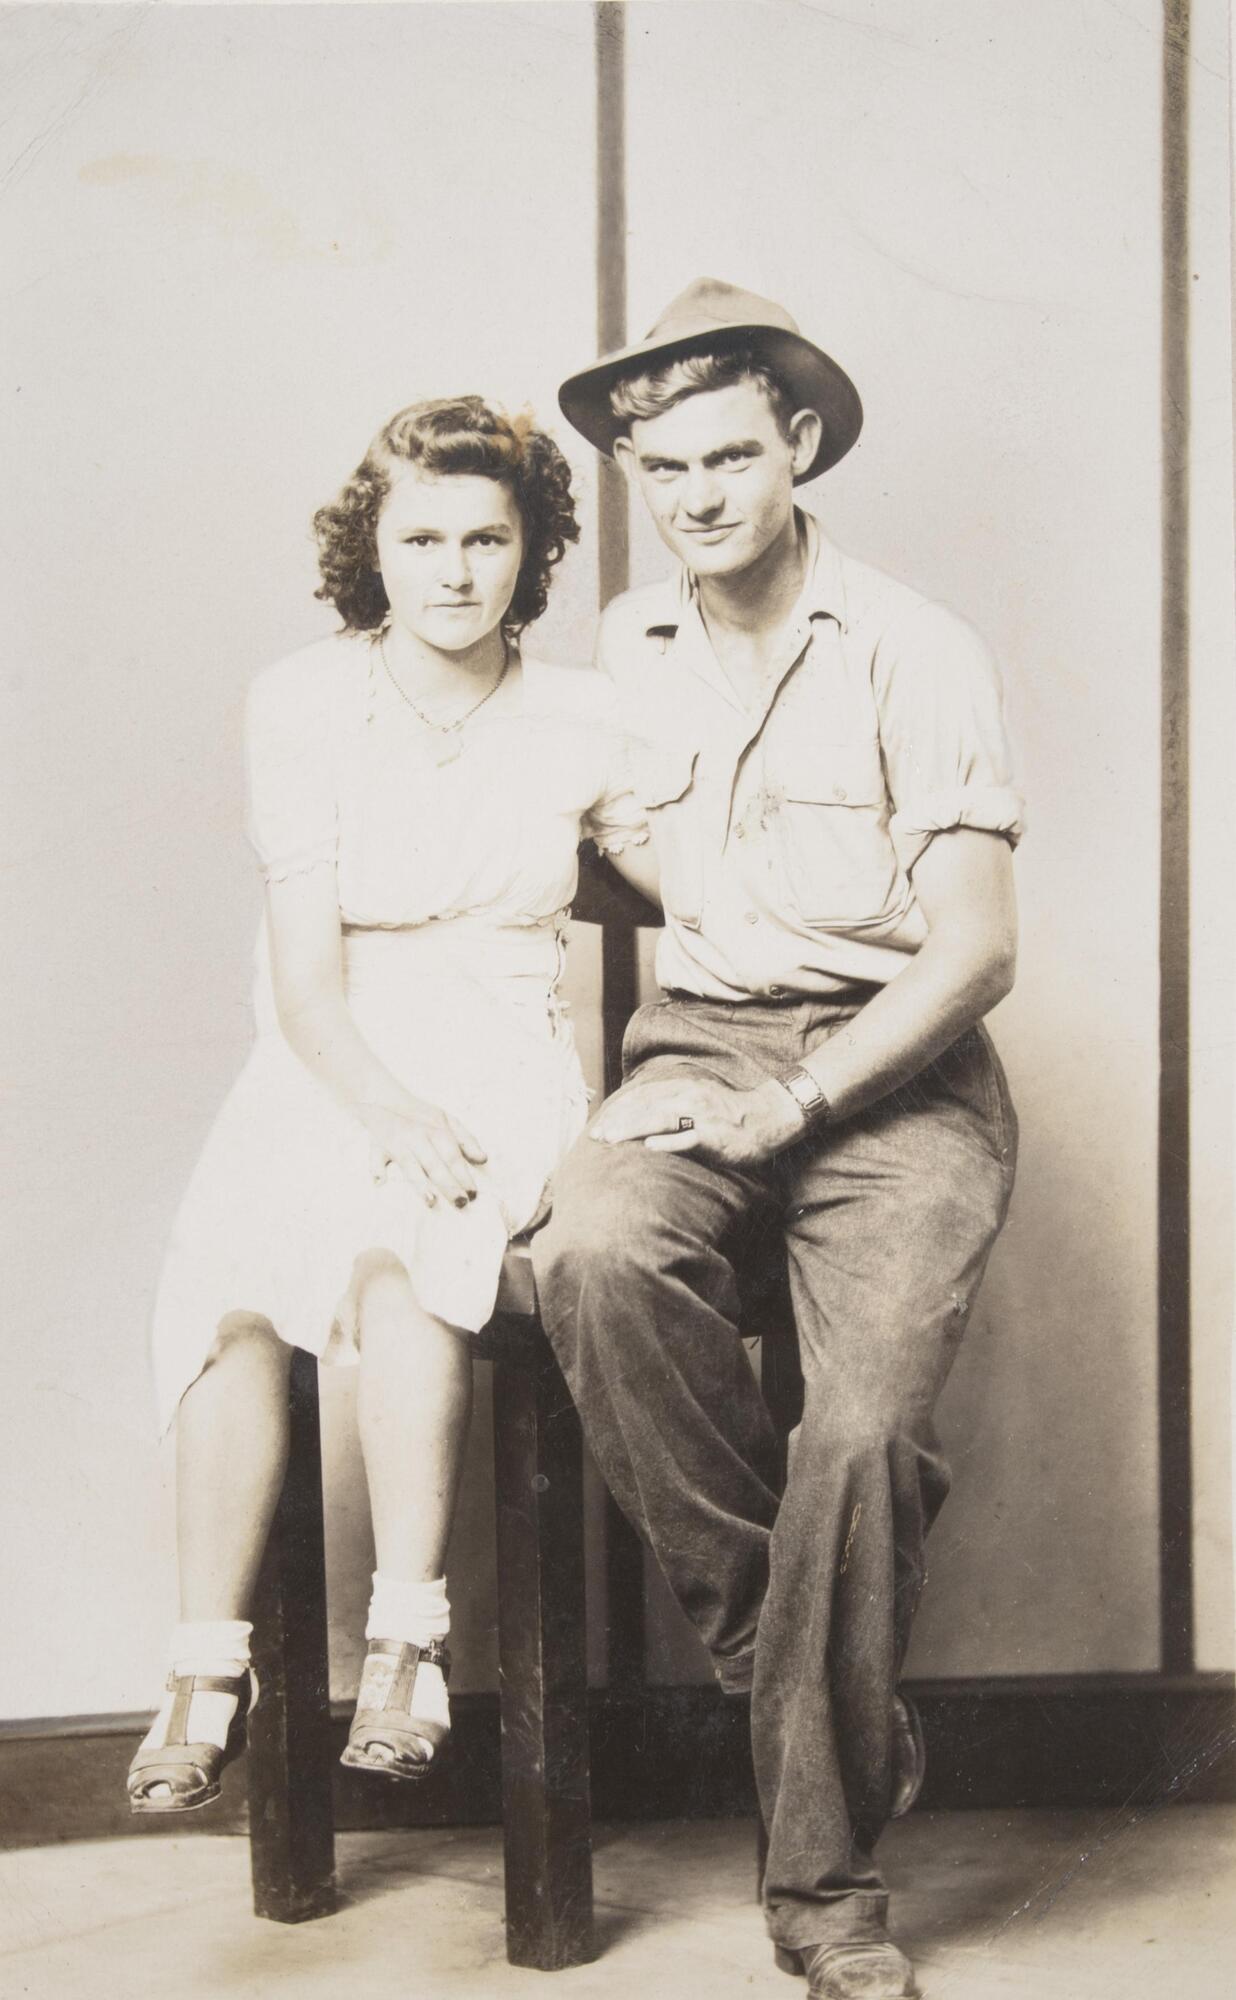 A couple seated in front of a striped backdrop with their arms around one another. A woman sits on the left, wearing a light dress, her feet hovering above the ground. A man sits on the right, wearing trousers, a light short-sleeved shirt, and hat.